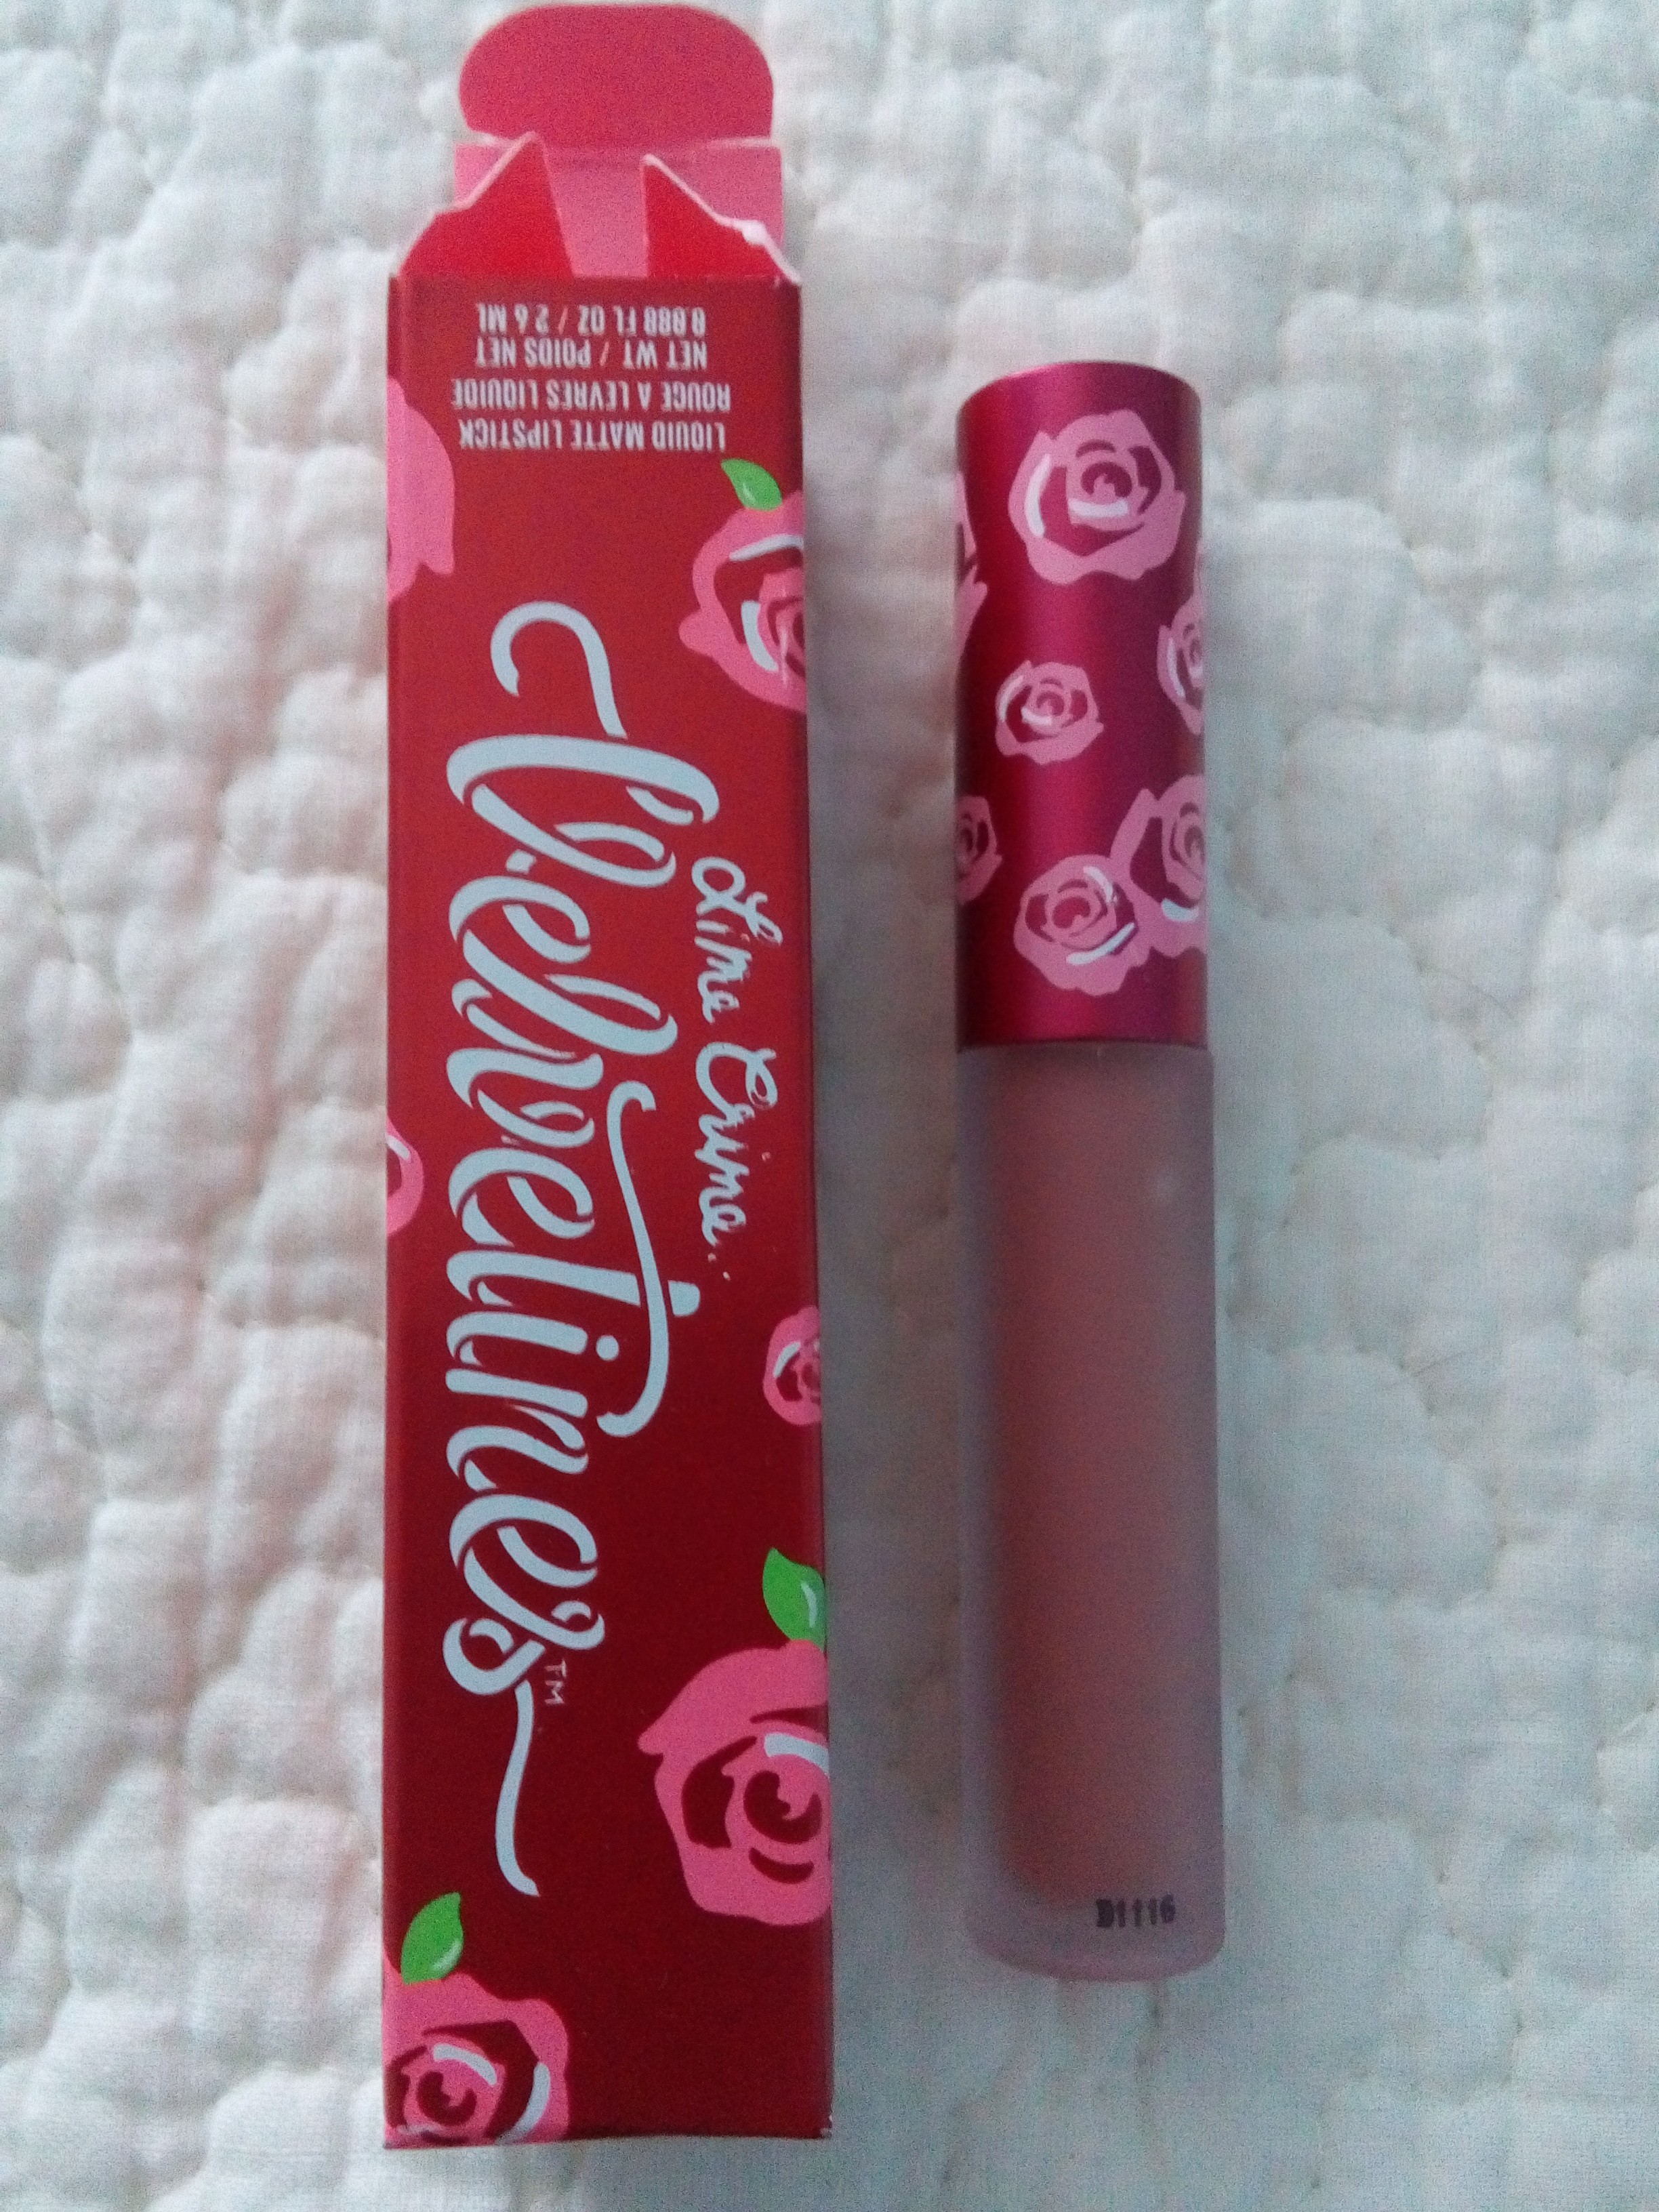 Lime Crime Velvetines bleached, buffy!